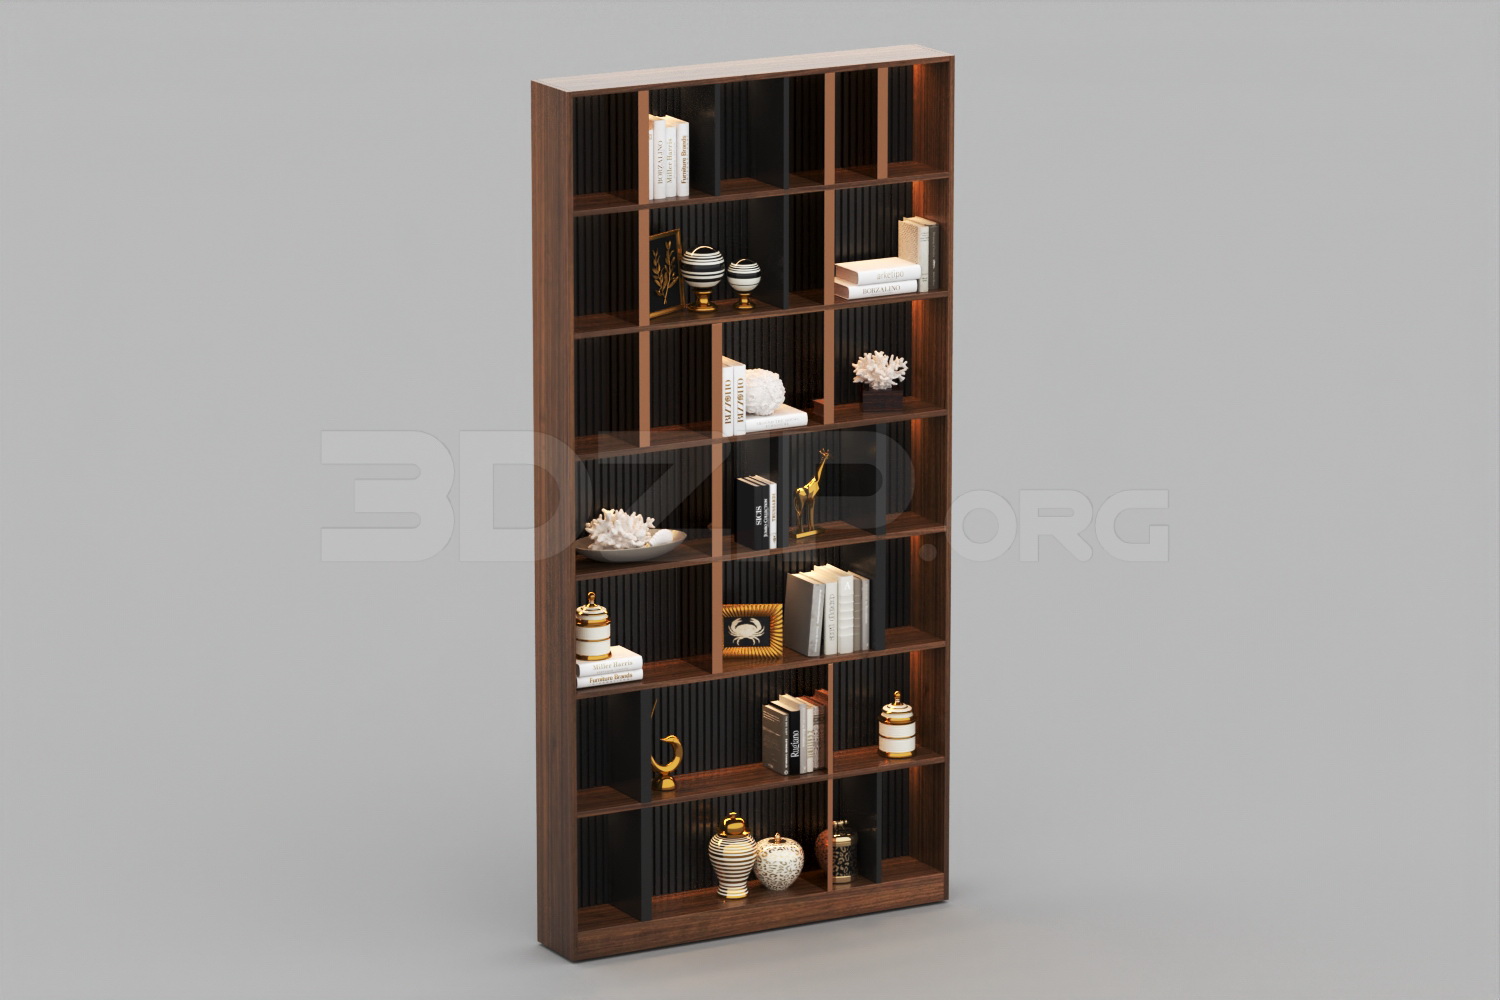 455. Download Free Bookcase Model By Hien Vu